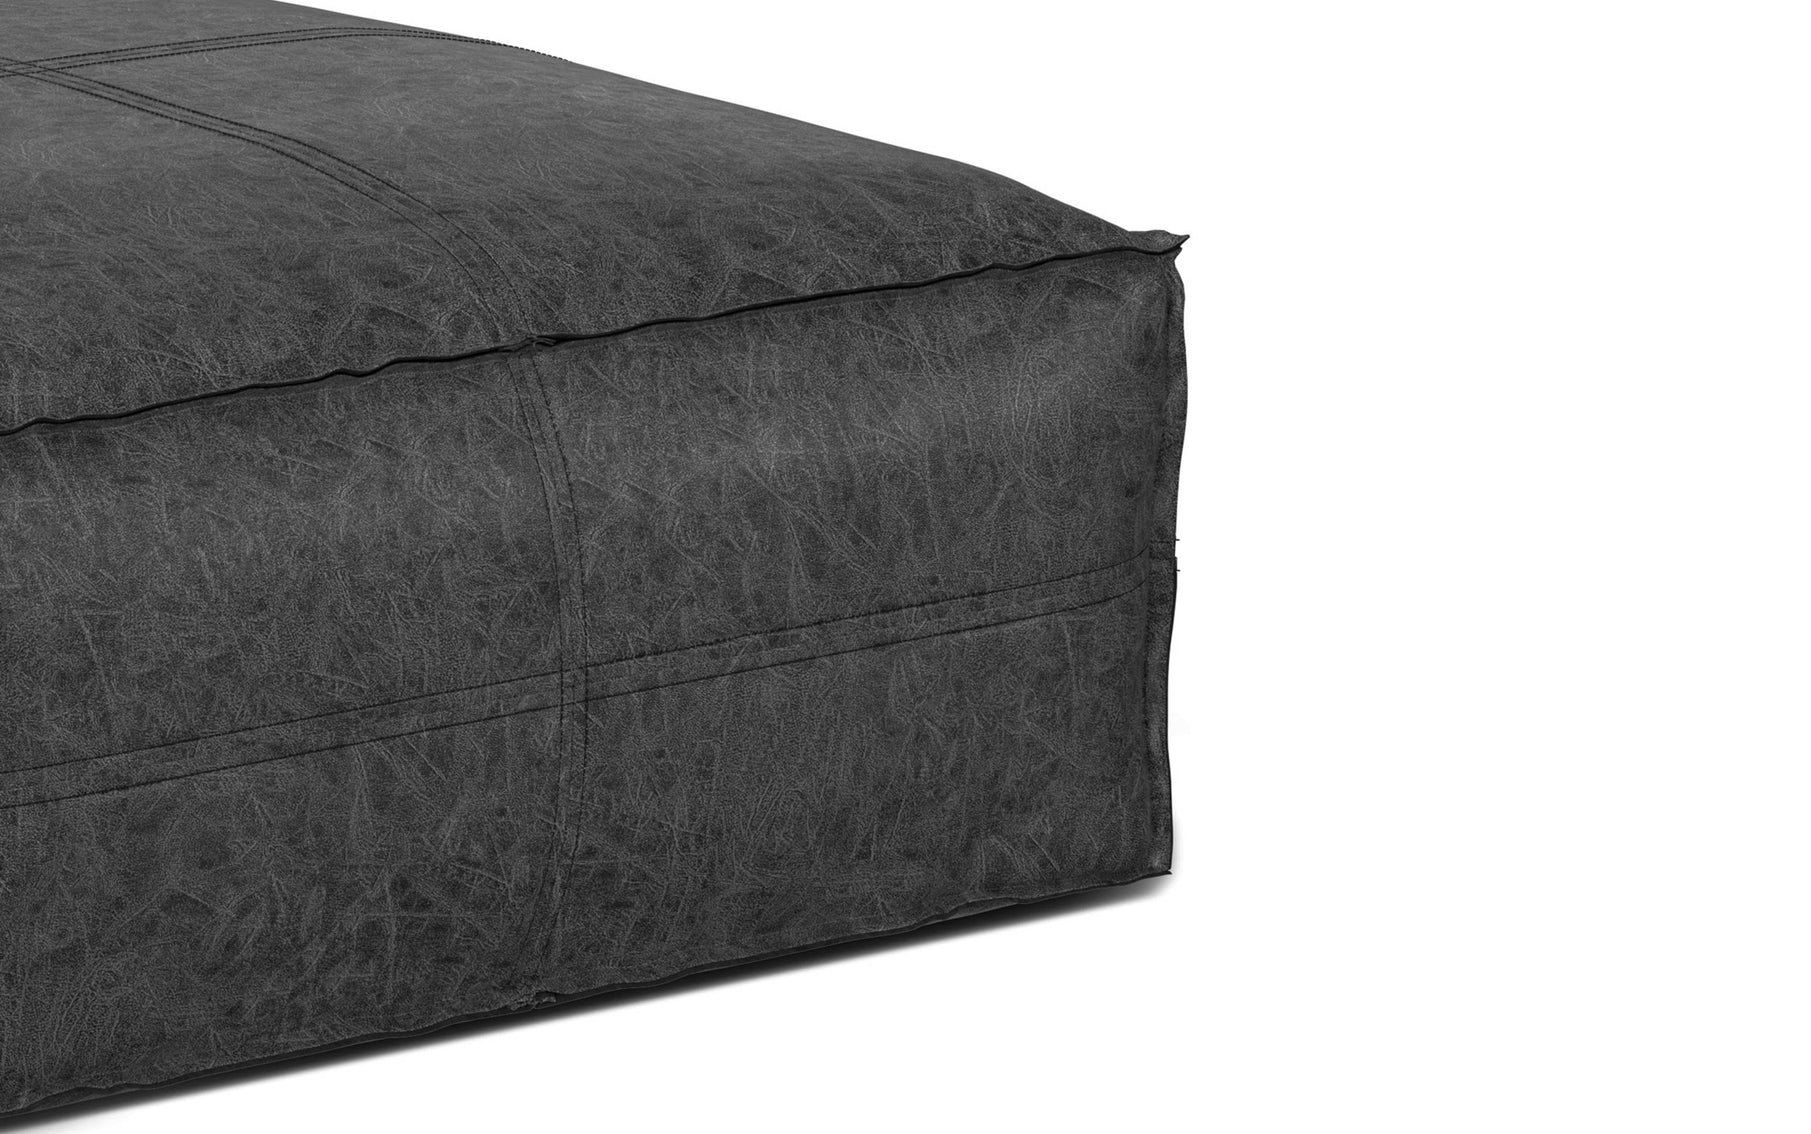 Distressed Black | Brody Large Square Coffee Table Pouf